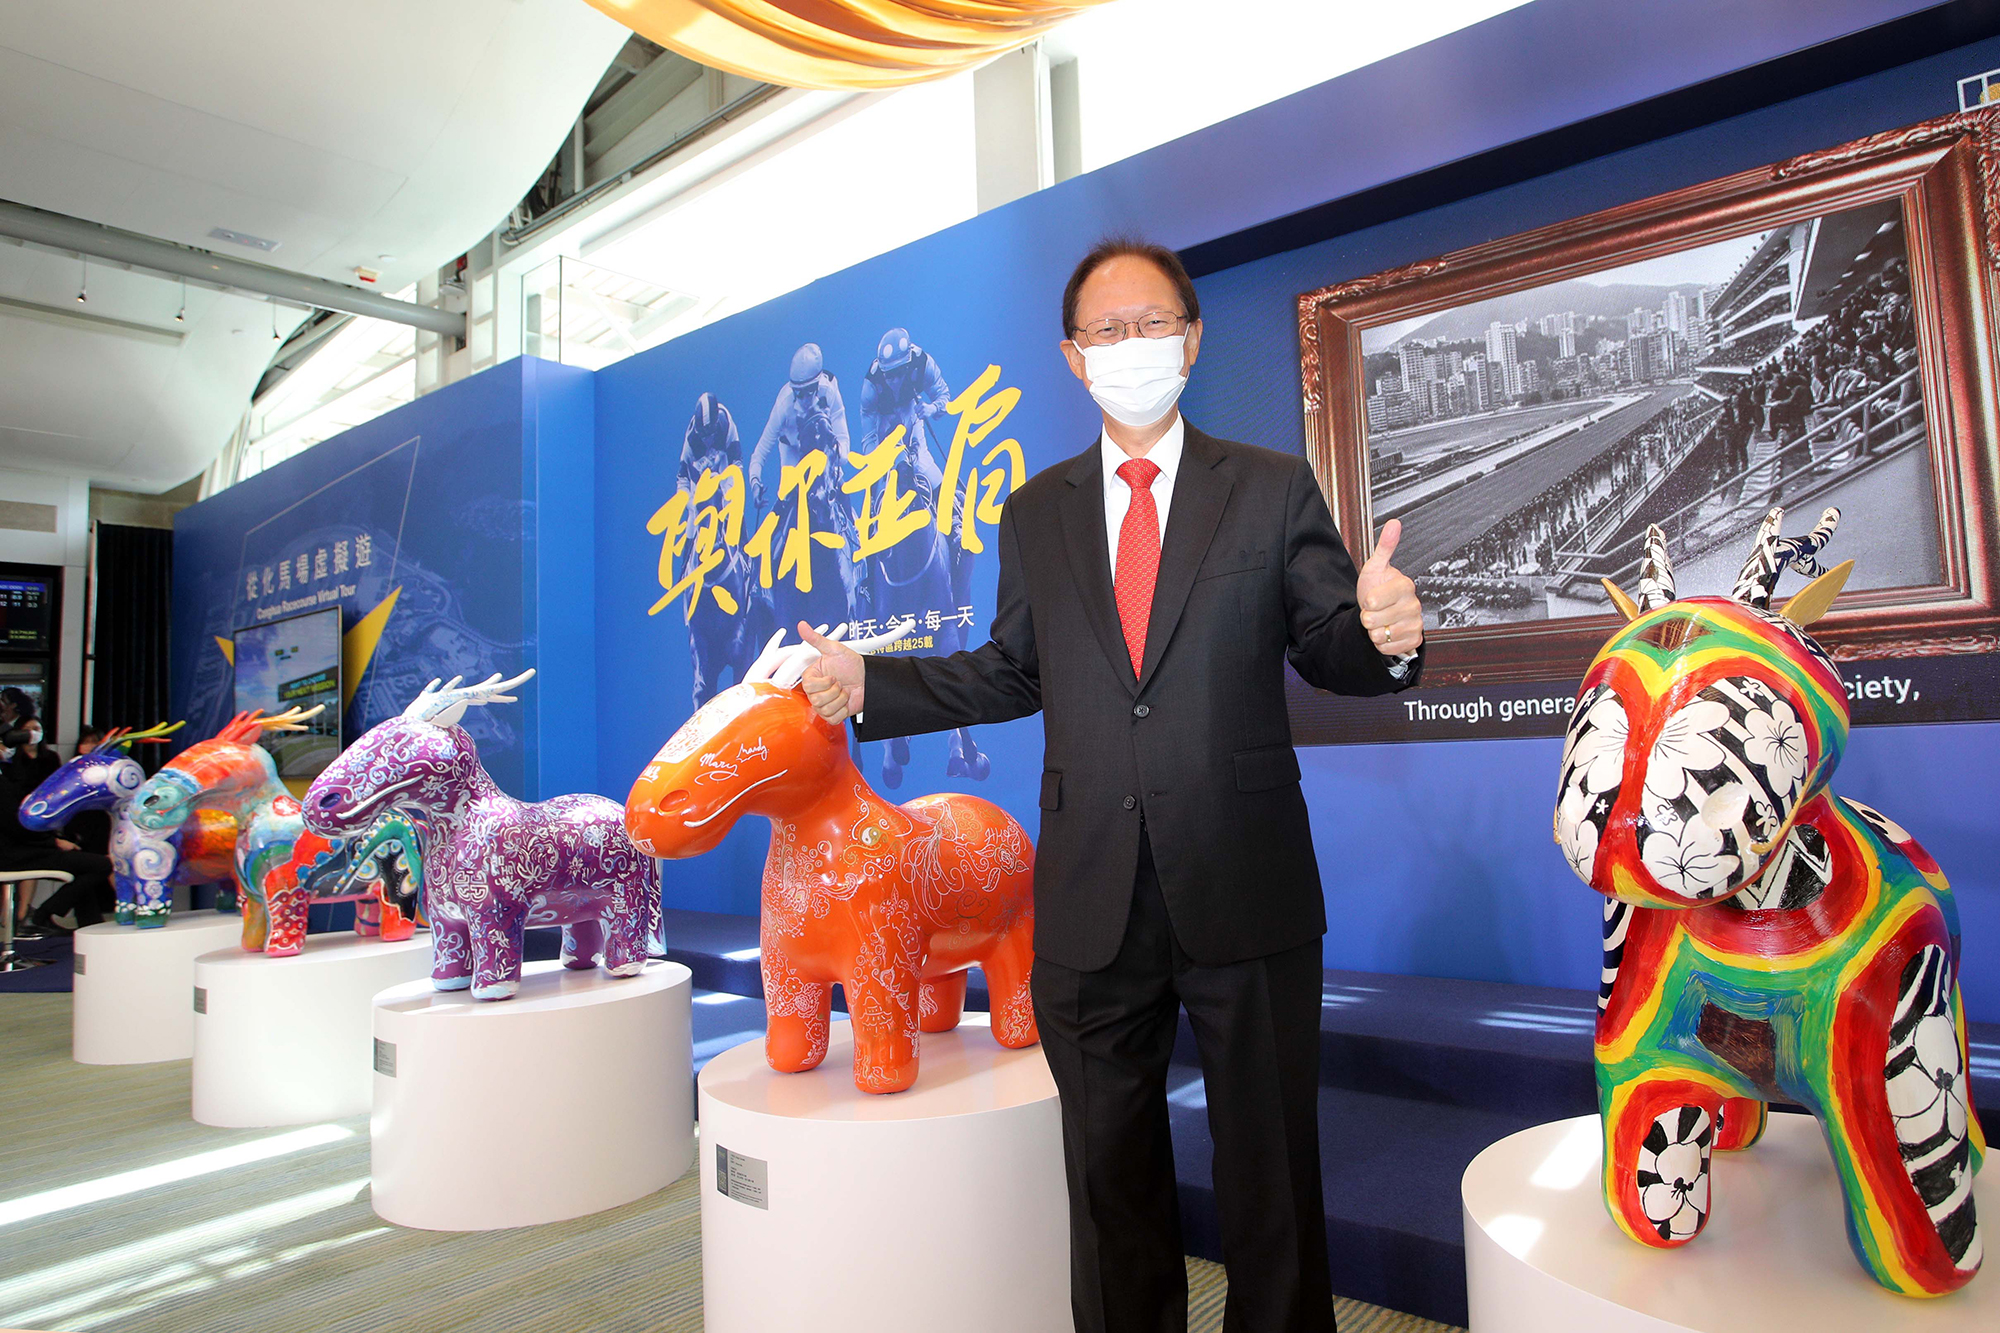 Club Chairman Philip Chen (Photo 3, 5th left), Chief Executive Officer Winfried Engelbrecht-Bresges (Photo 3, 5th right), Stewards; at the “With You. Then. Now. Always.” exhibition launched at the 25th Anniversary Hong Kong Reunification Raceday. Interactive exhibits enable guests to experience moments associated with the Club from the past 25 years.